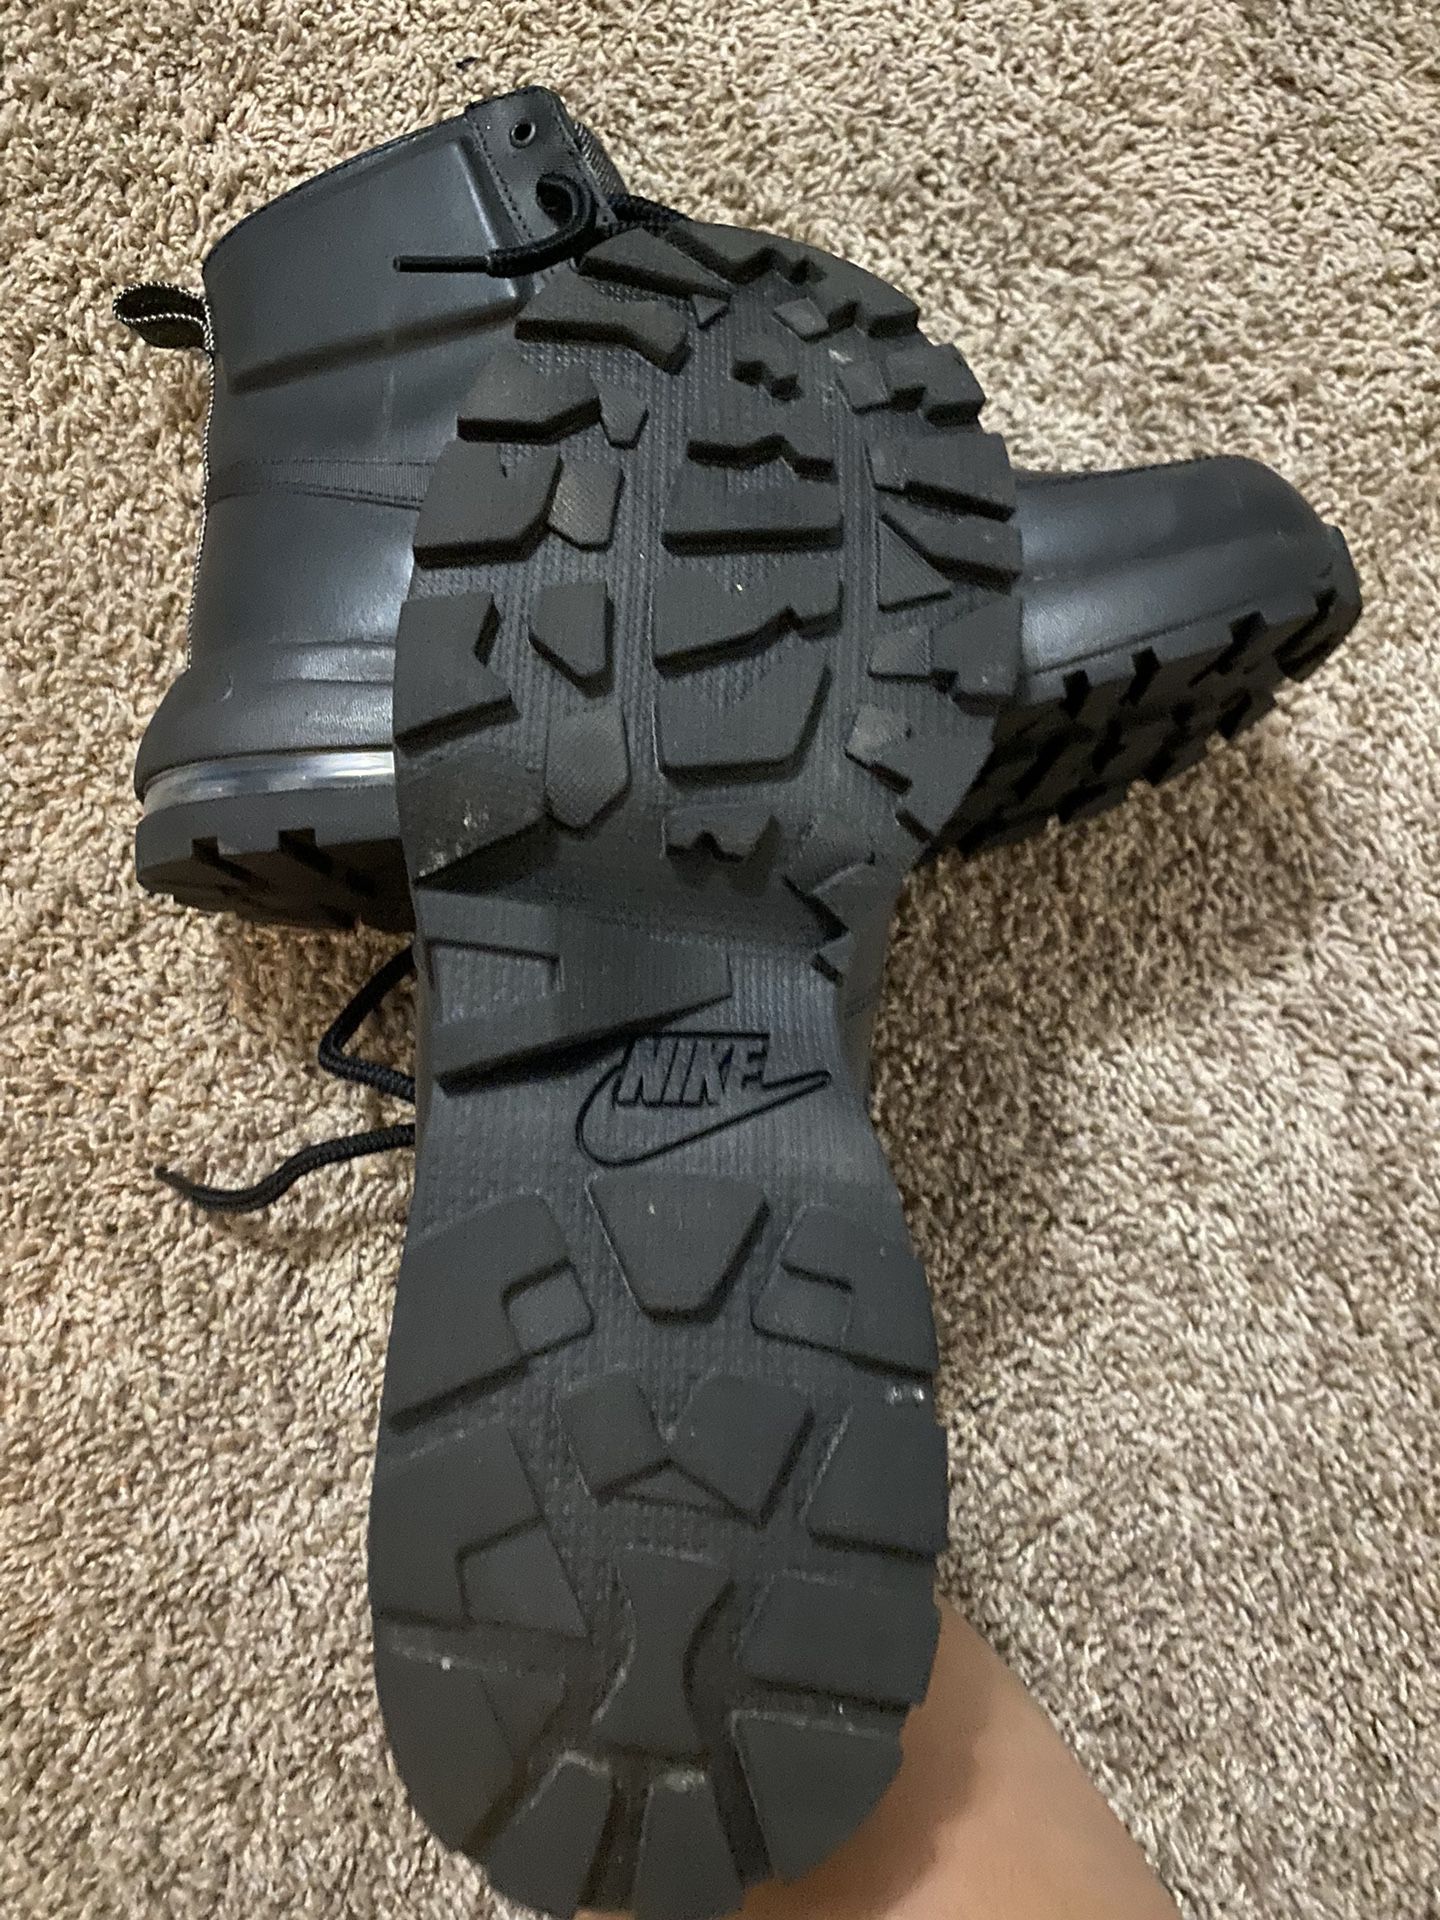 Nike Boots Size 11